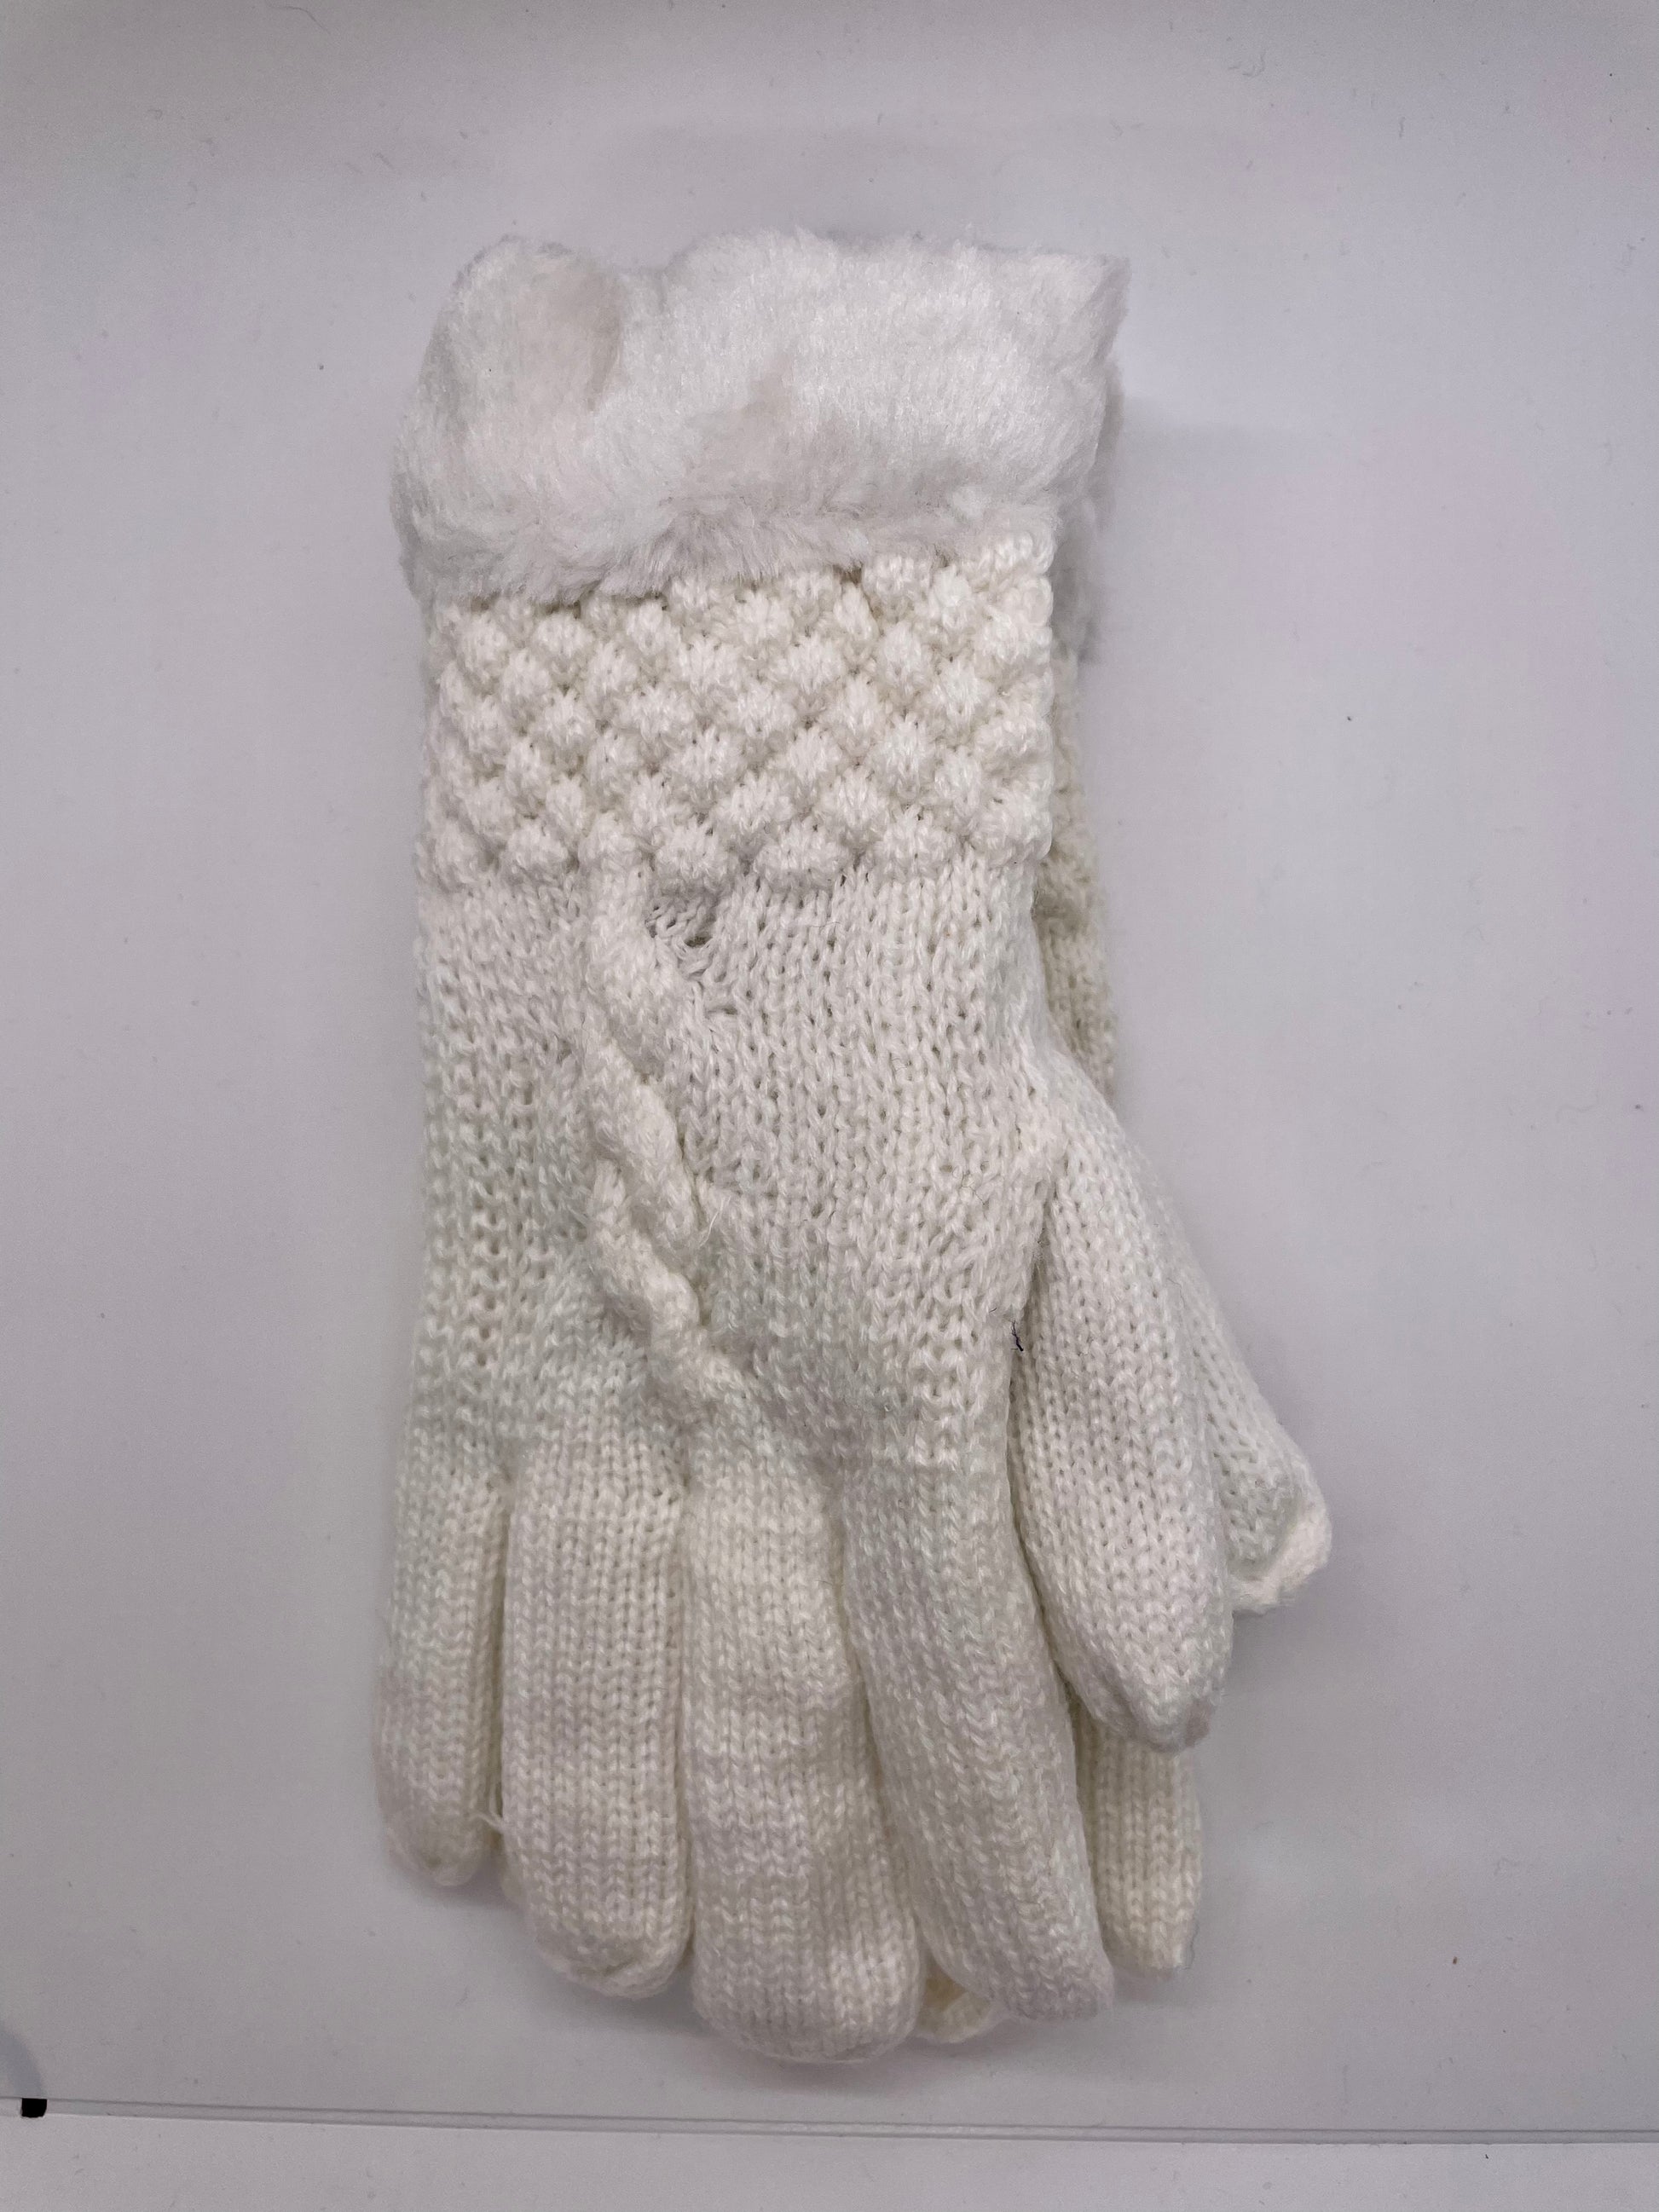 White women's winter gloves with a knit texture and a durable design